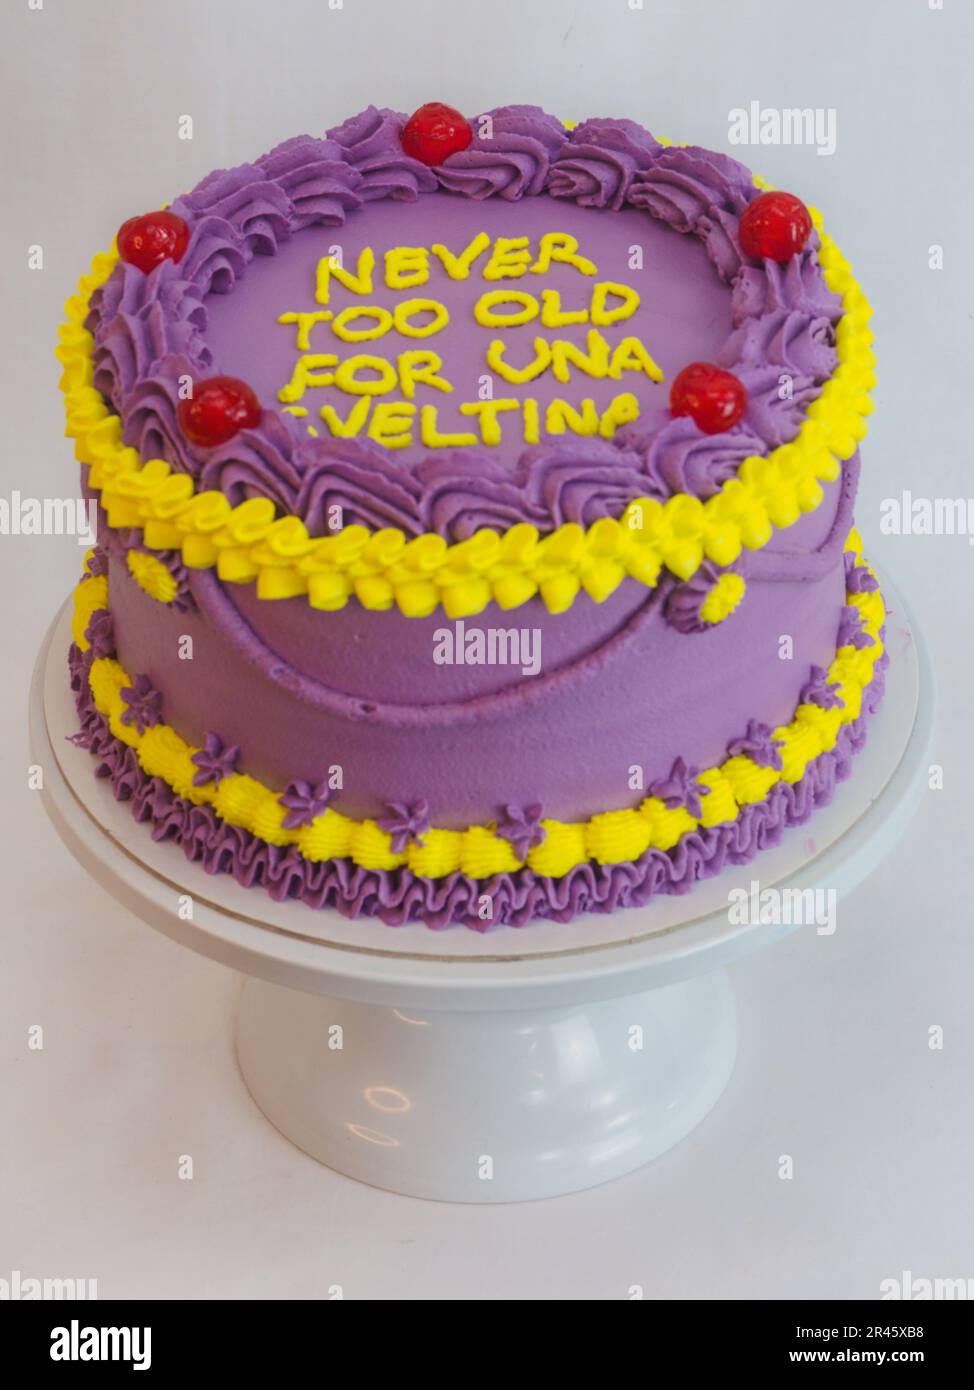 frosted icing violet yellow classic cilyndrical cake with text messagge topping on studio white background. Romantic layered cupcake. Stock Photo